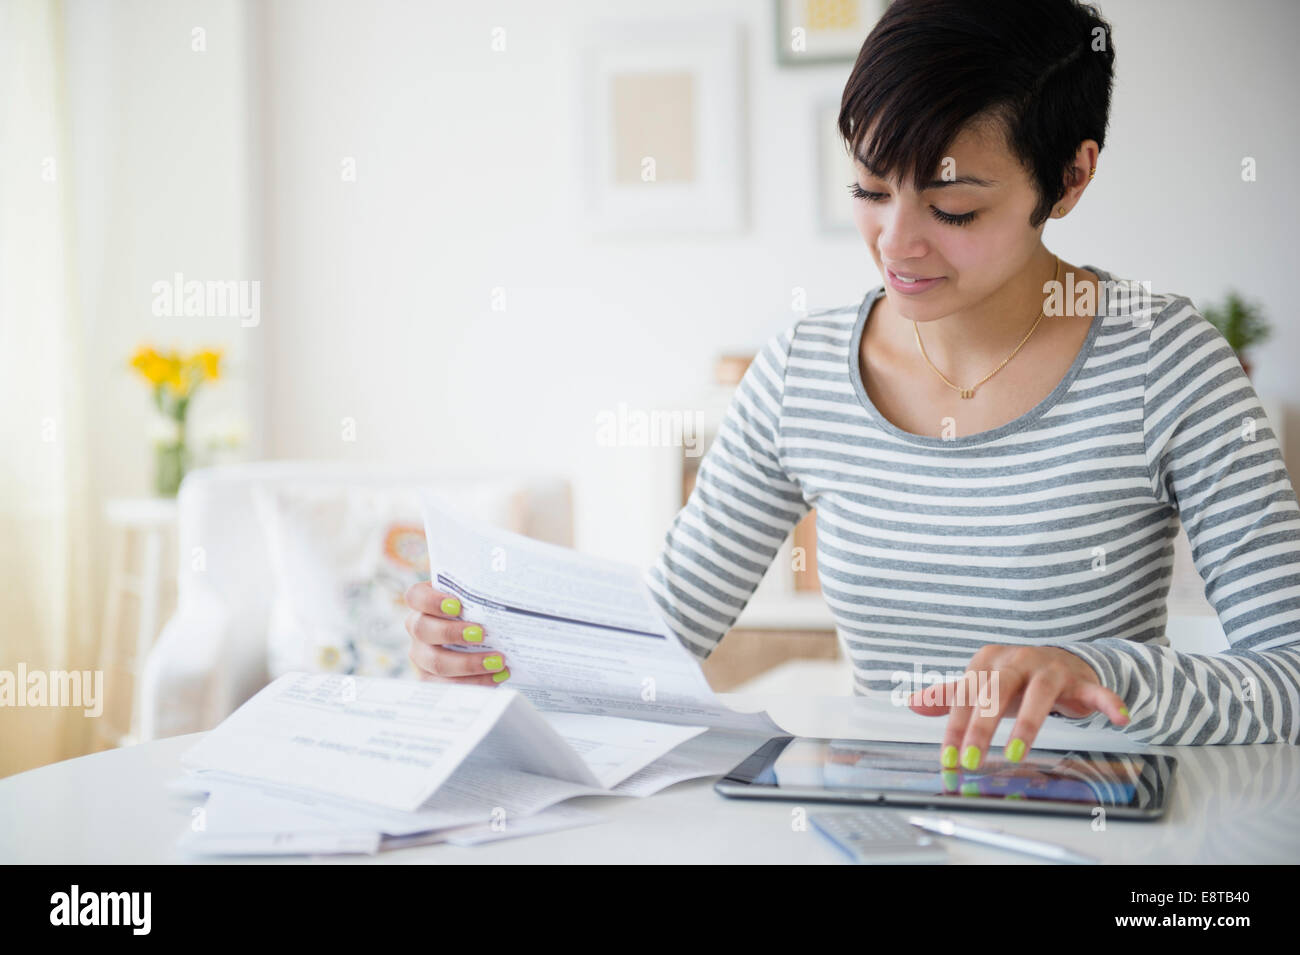 Mixed race woman paying bills on digital tablet Stock Photo